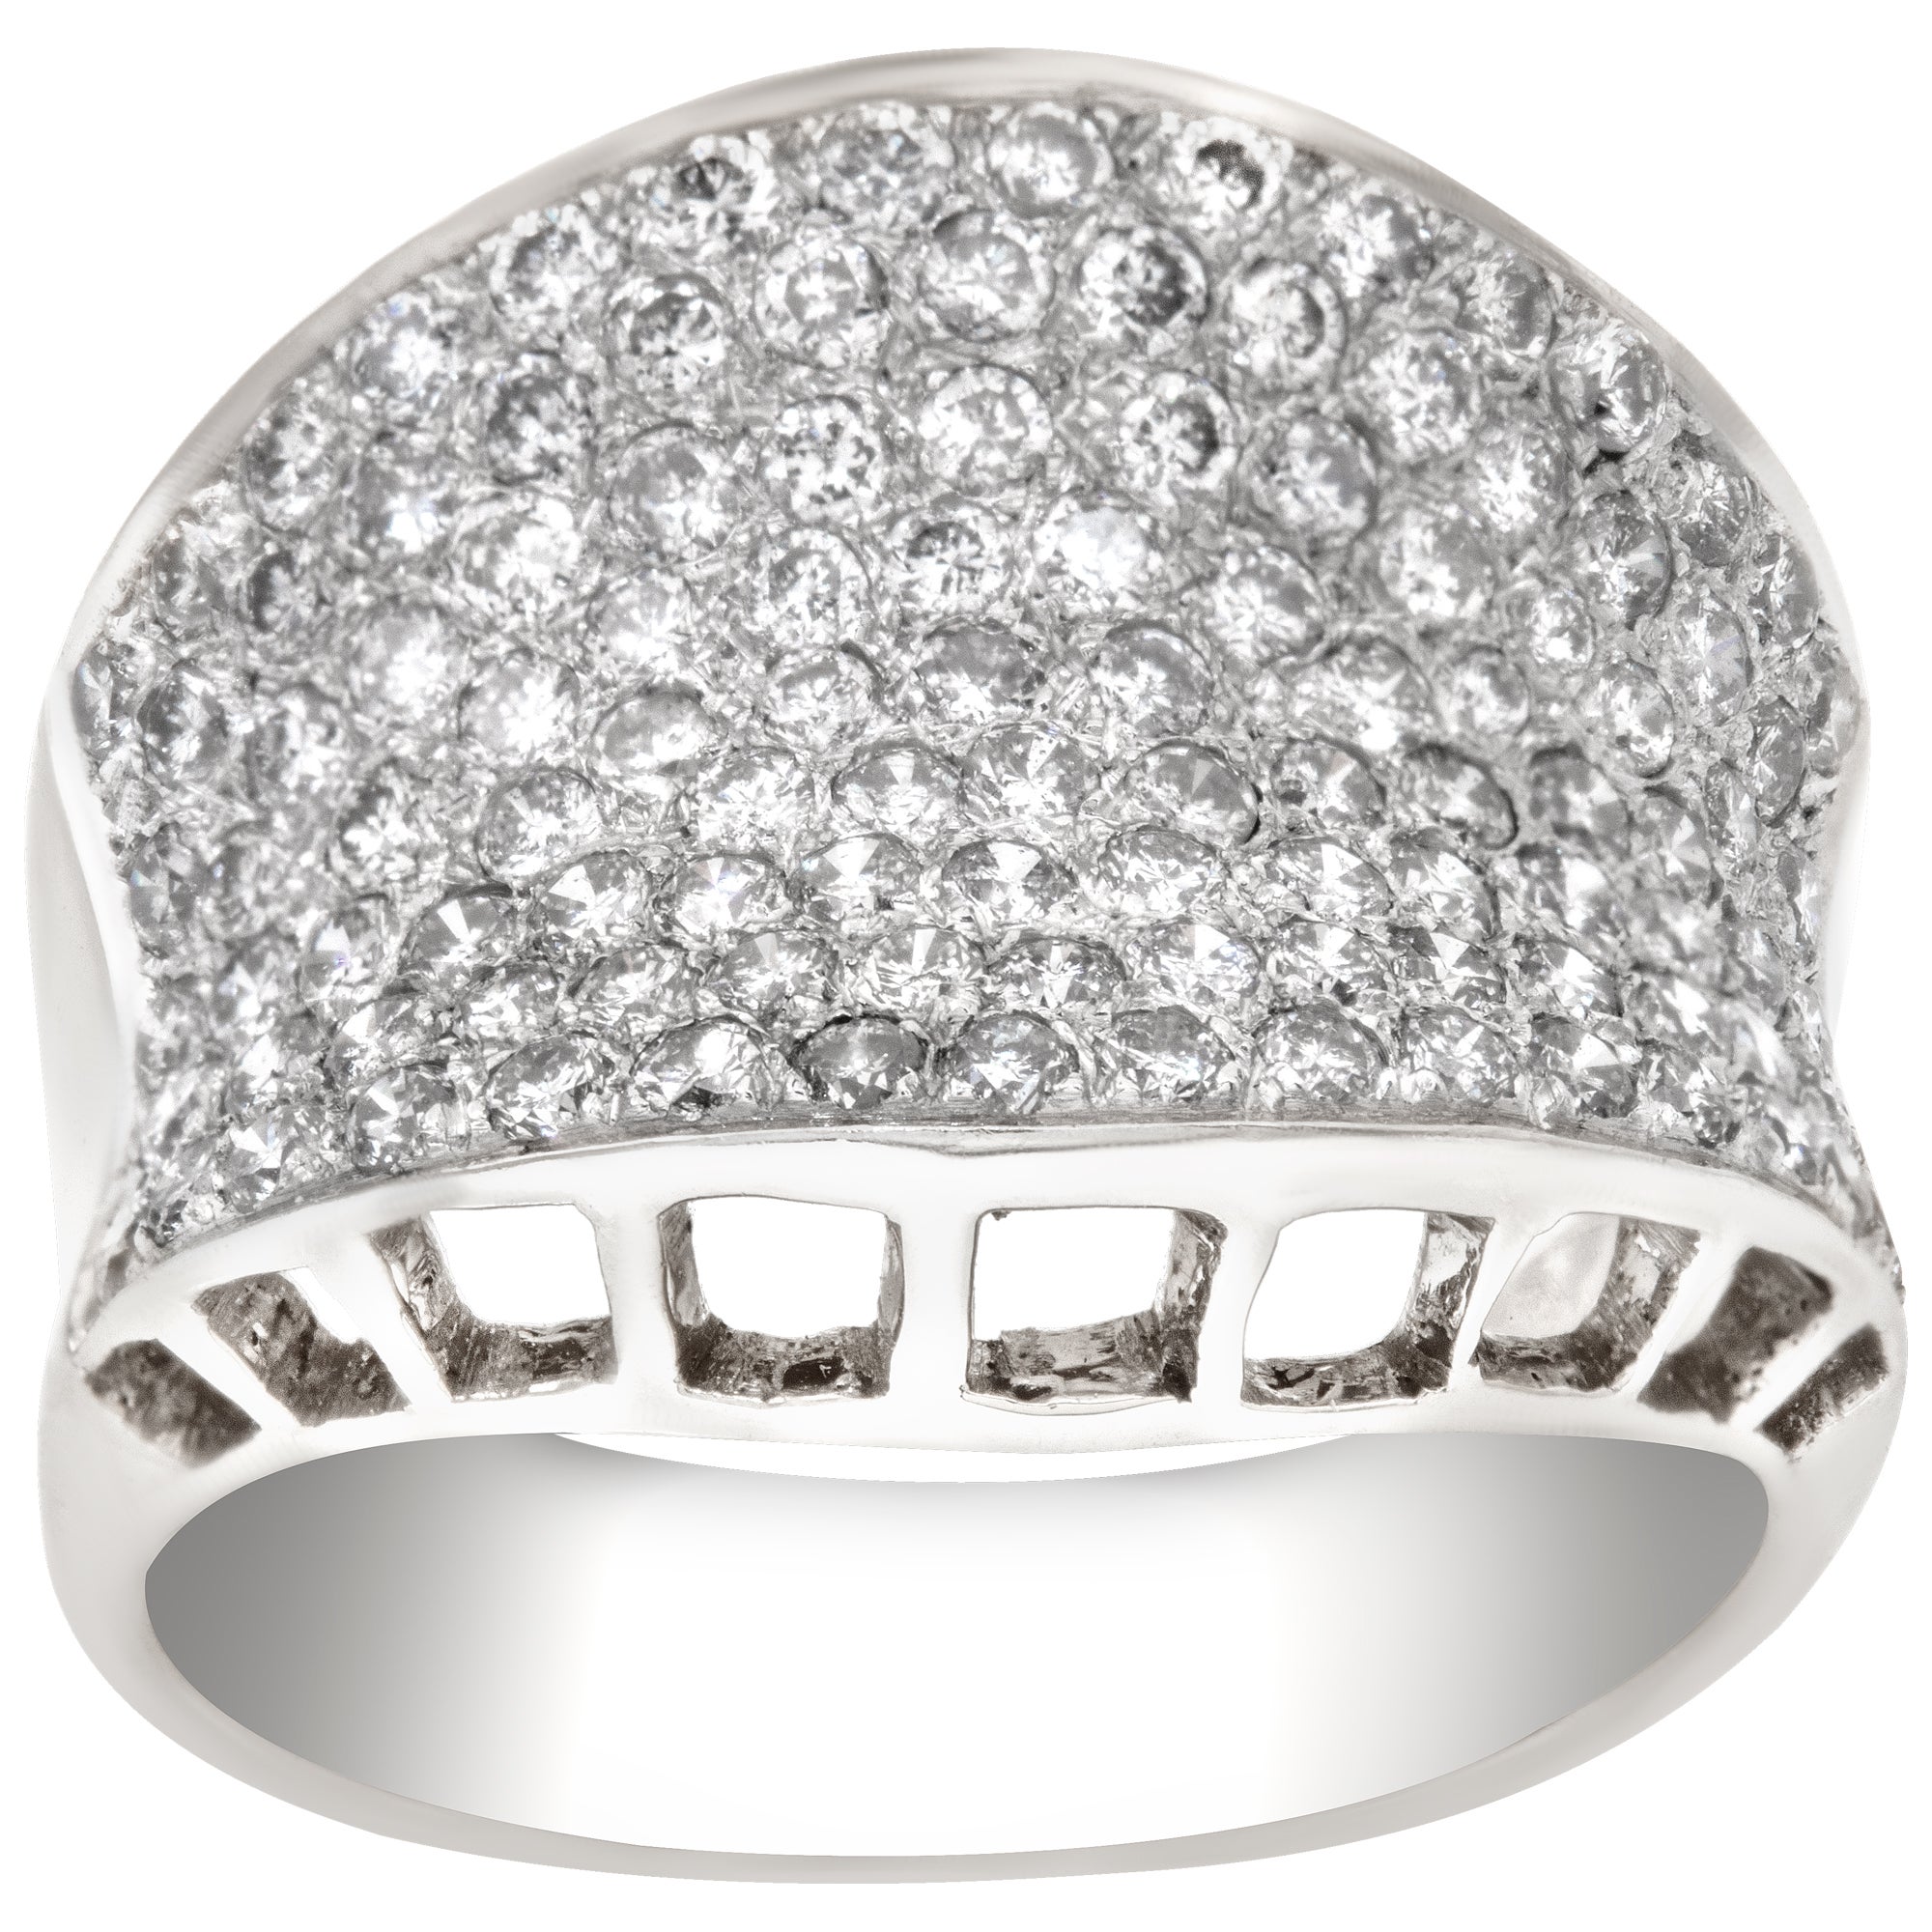 Exquisite pave diamond ring in 18k white gold. 1.25 carats in pave diamonds